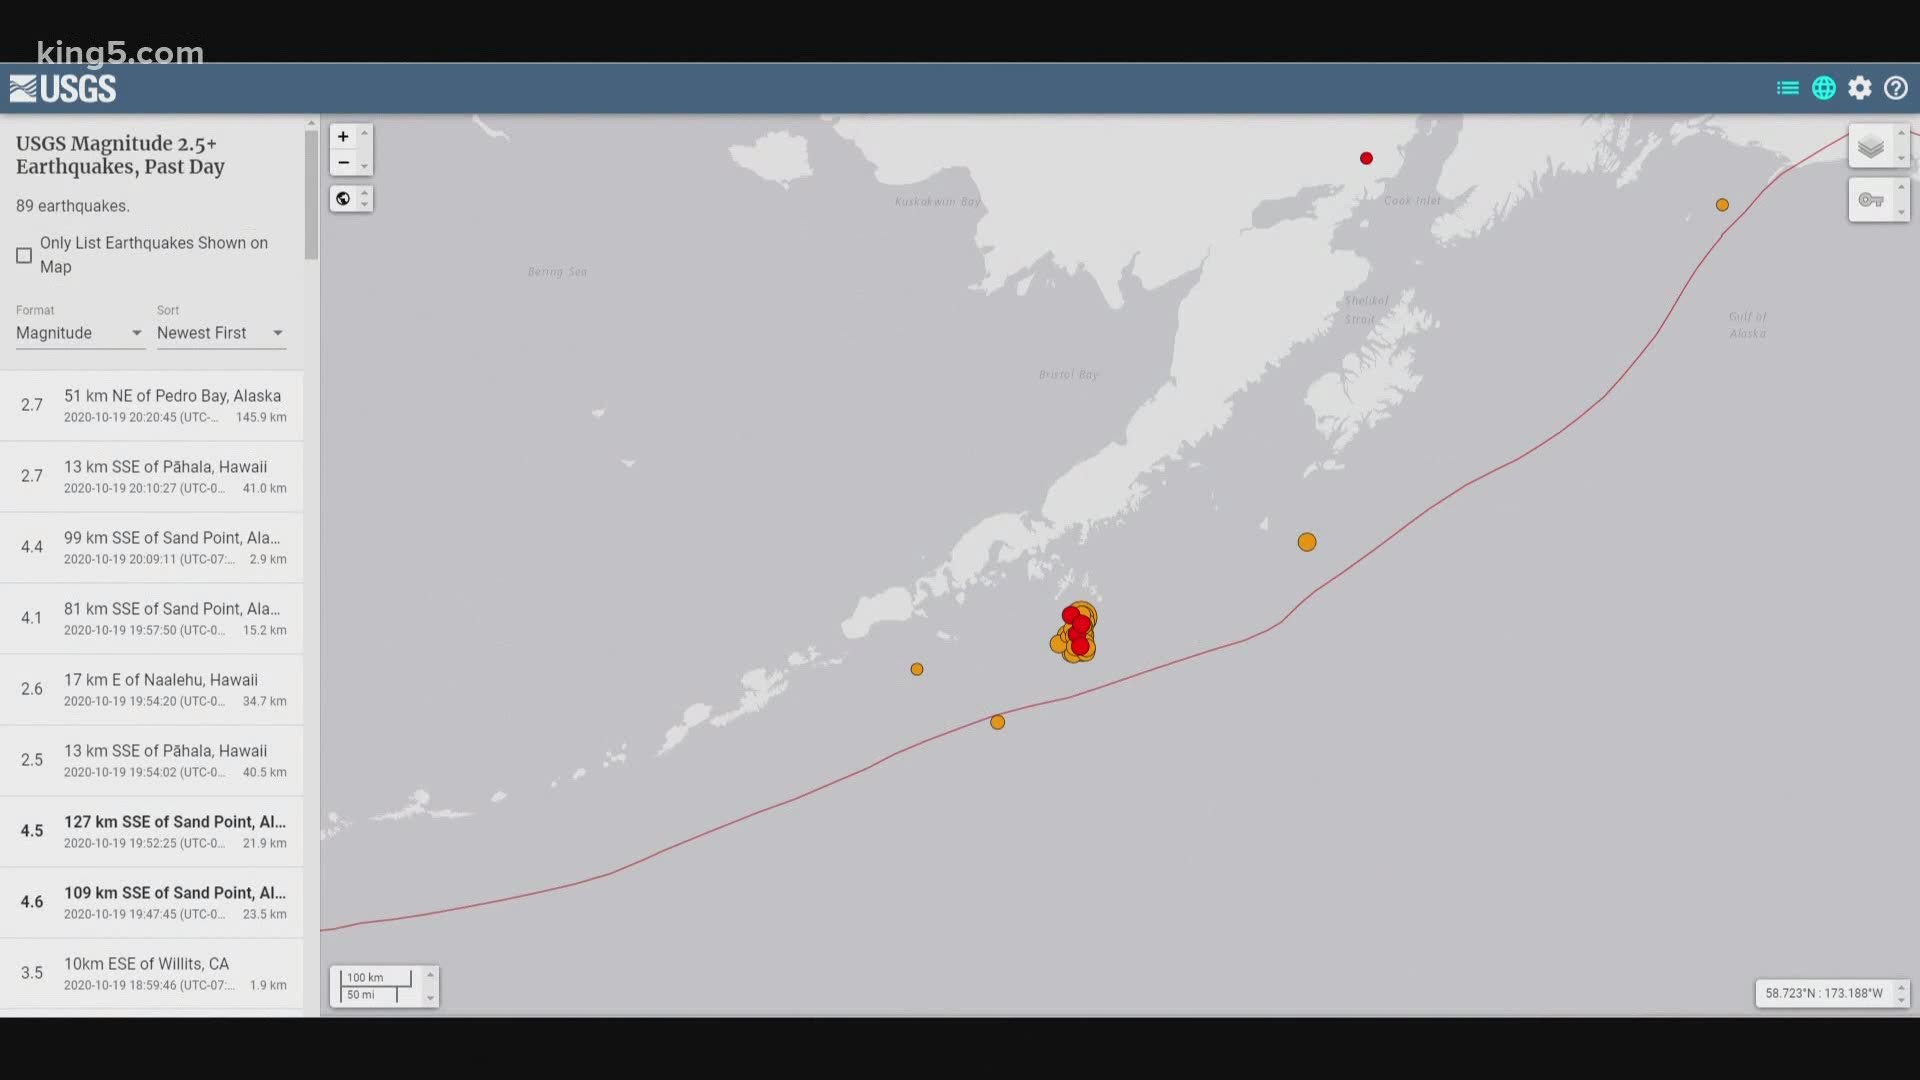 If the earthquake was bigger than a 7.5 in Alaska, it could have had an impact on Washington.